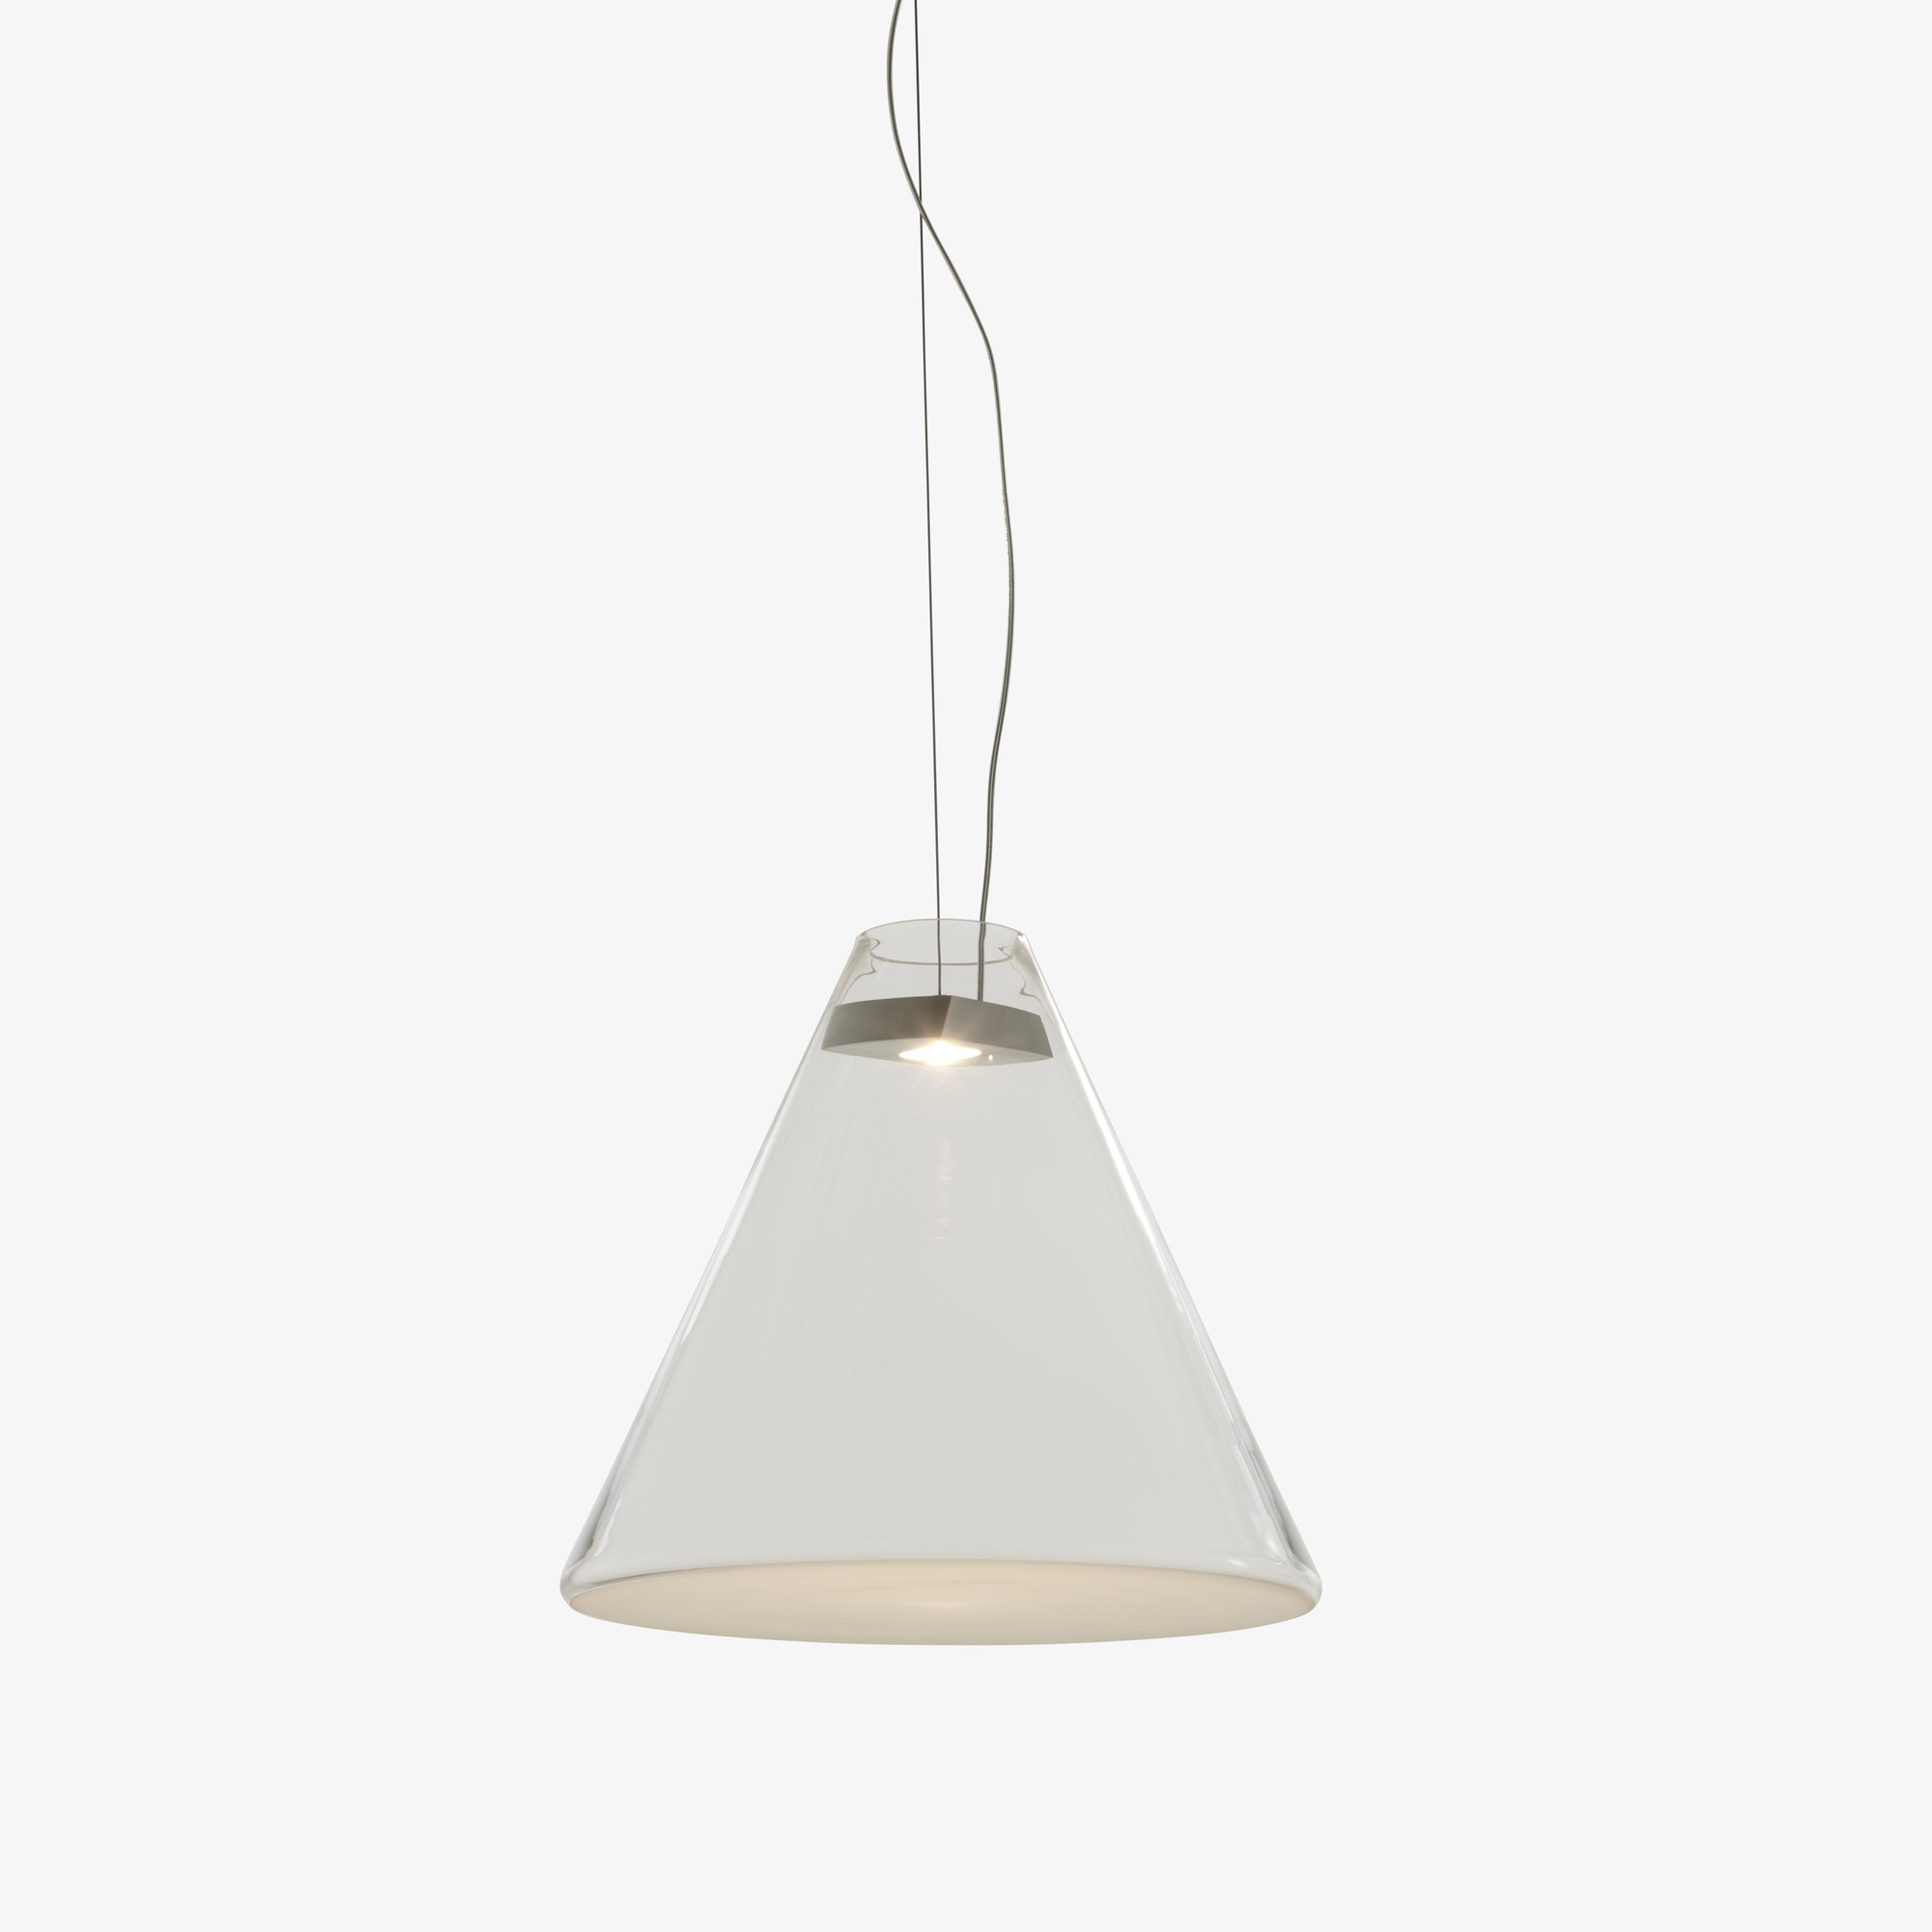 Image Suspended ceiling light   1